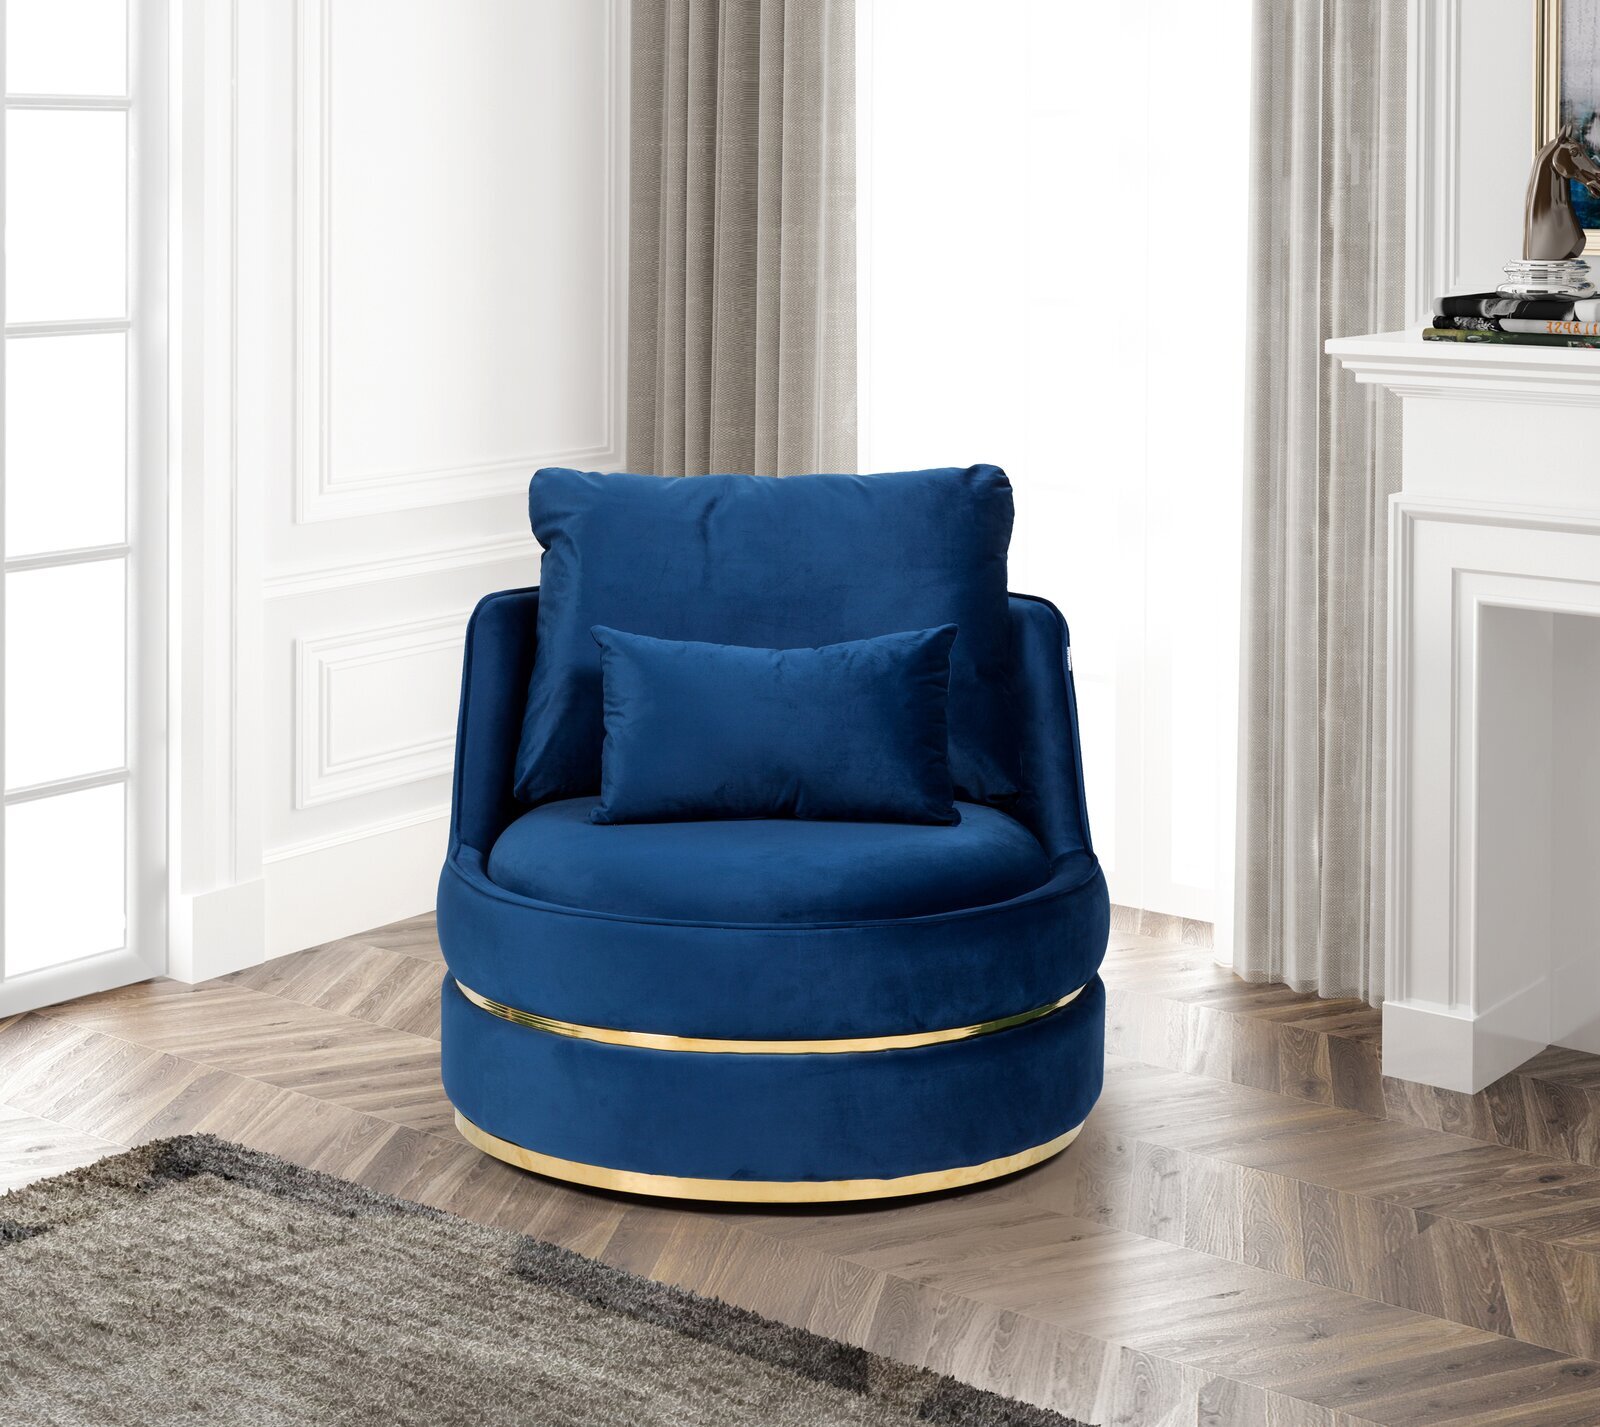 A gilded and glam large swivel chair